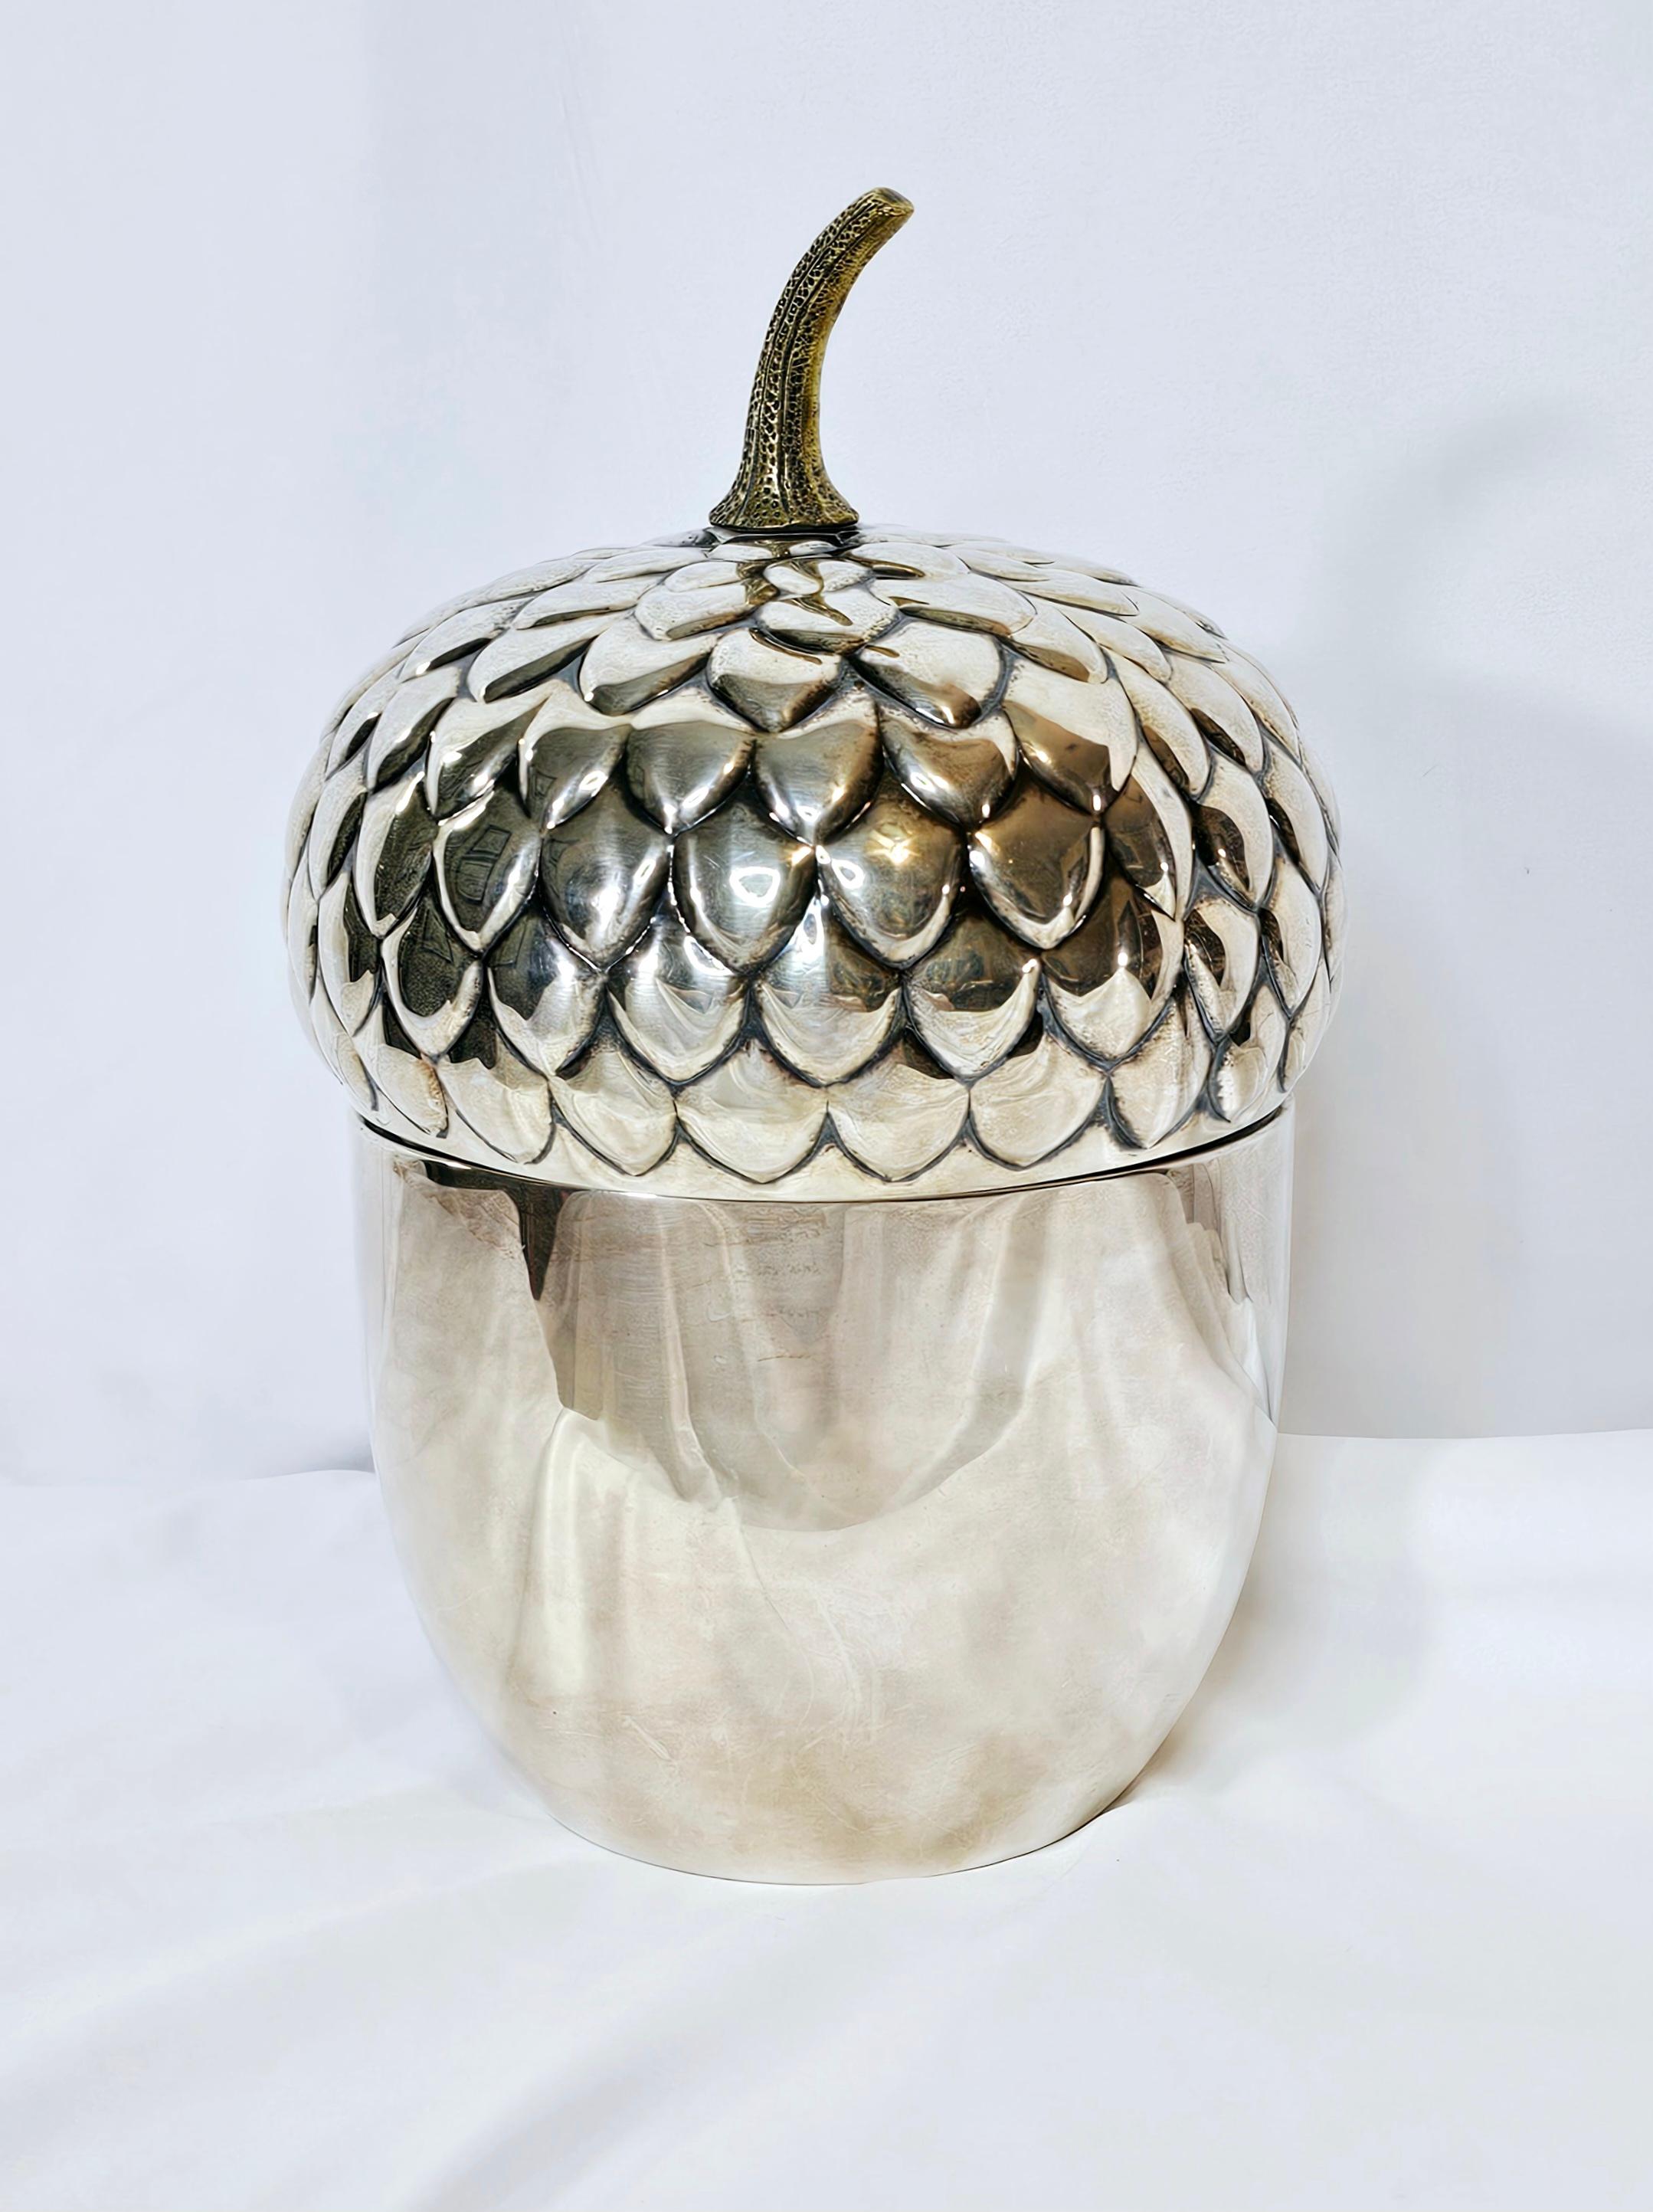 Acorn Shaped Ice Bucket by Teghini Firenze 1960s For Sale 2